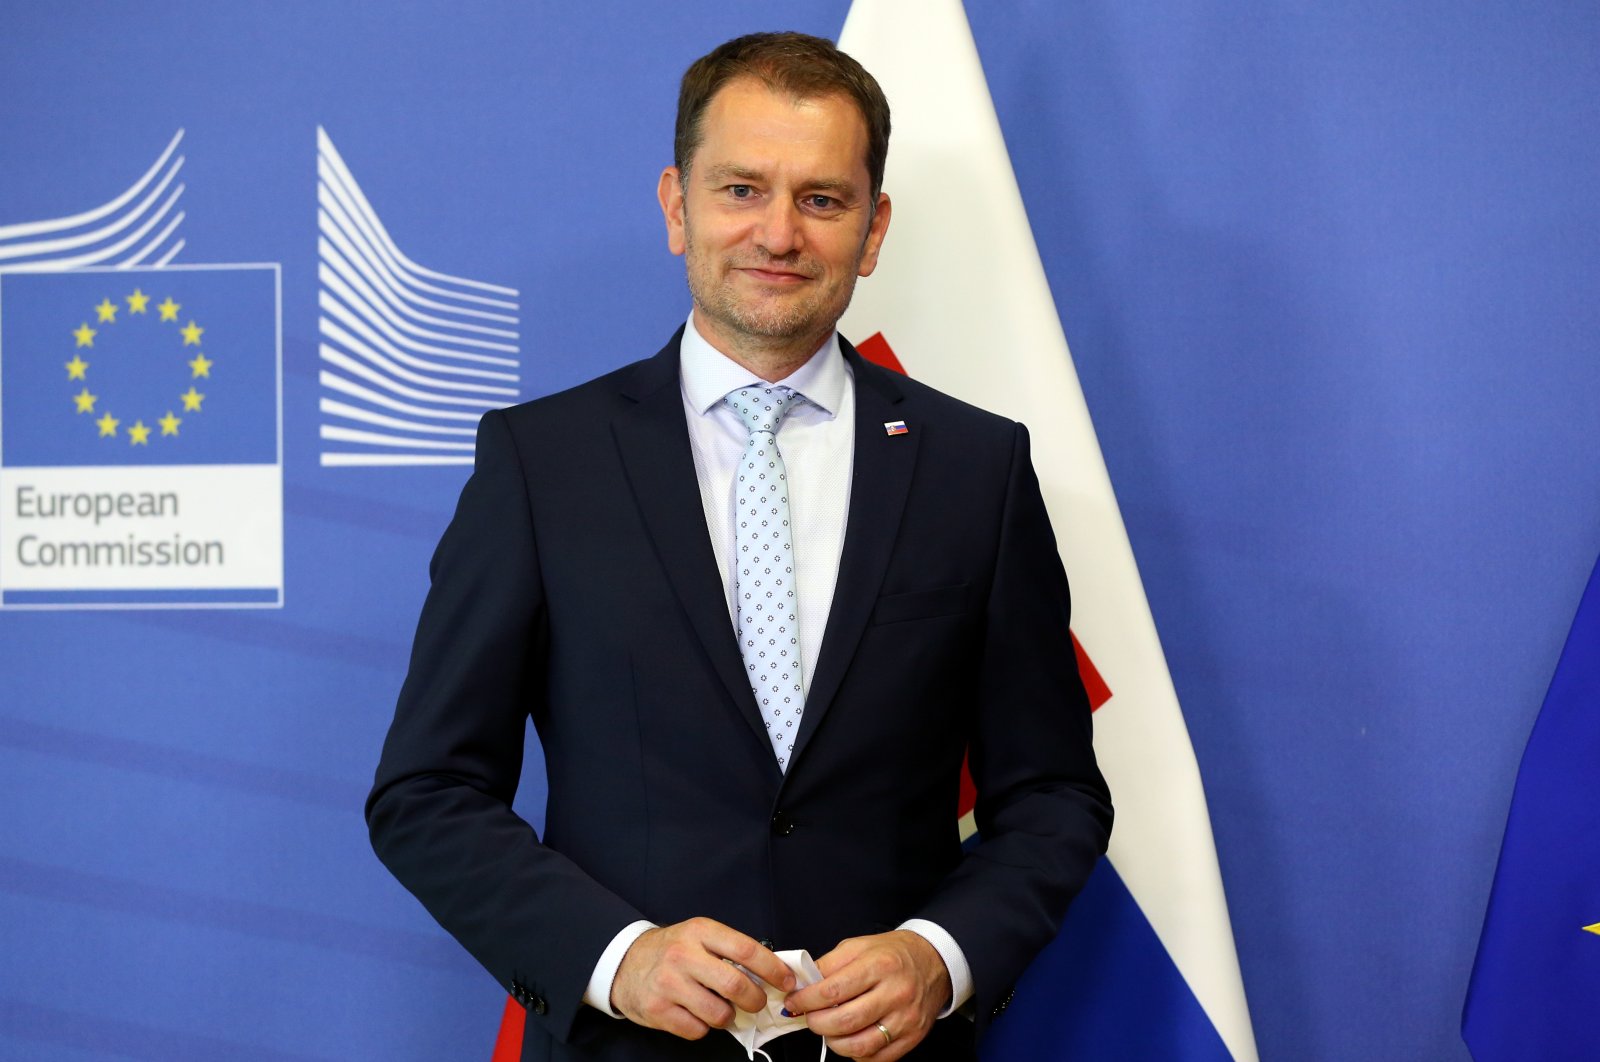 Slovakian Prime Minister Igor Matovic poses for press after a meeting with the President of the European Commission Ursula von der Leyen in Brussels, July 16, 2020. (AA)
